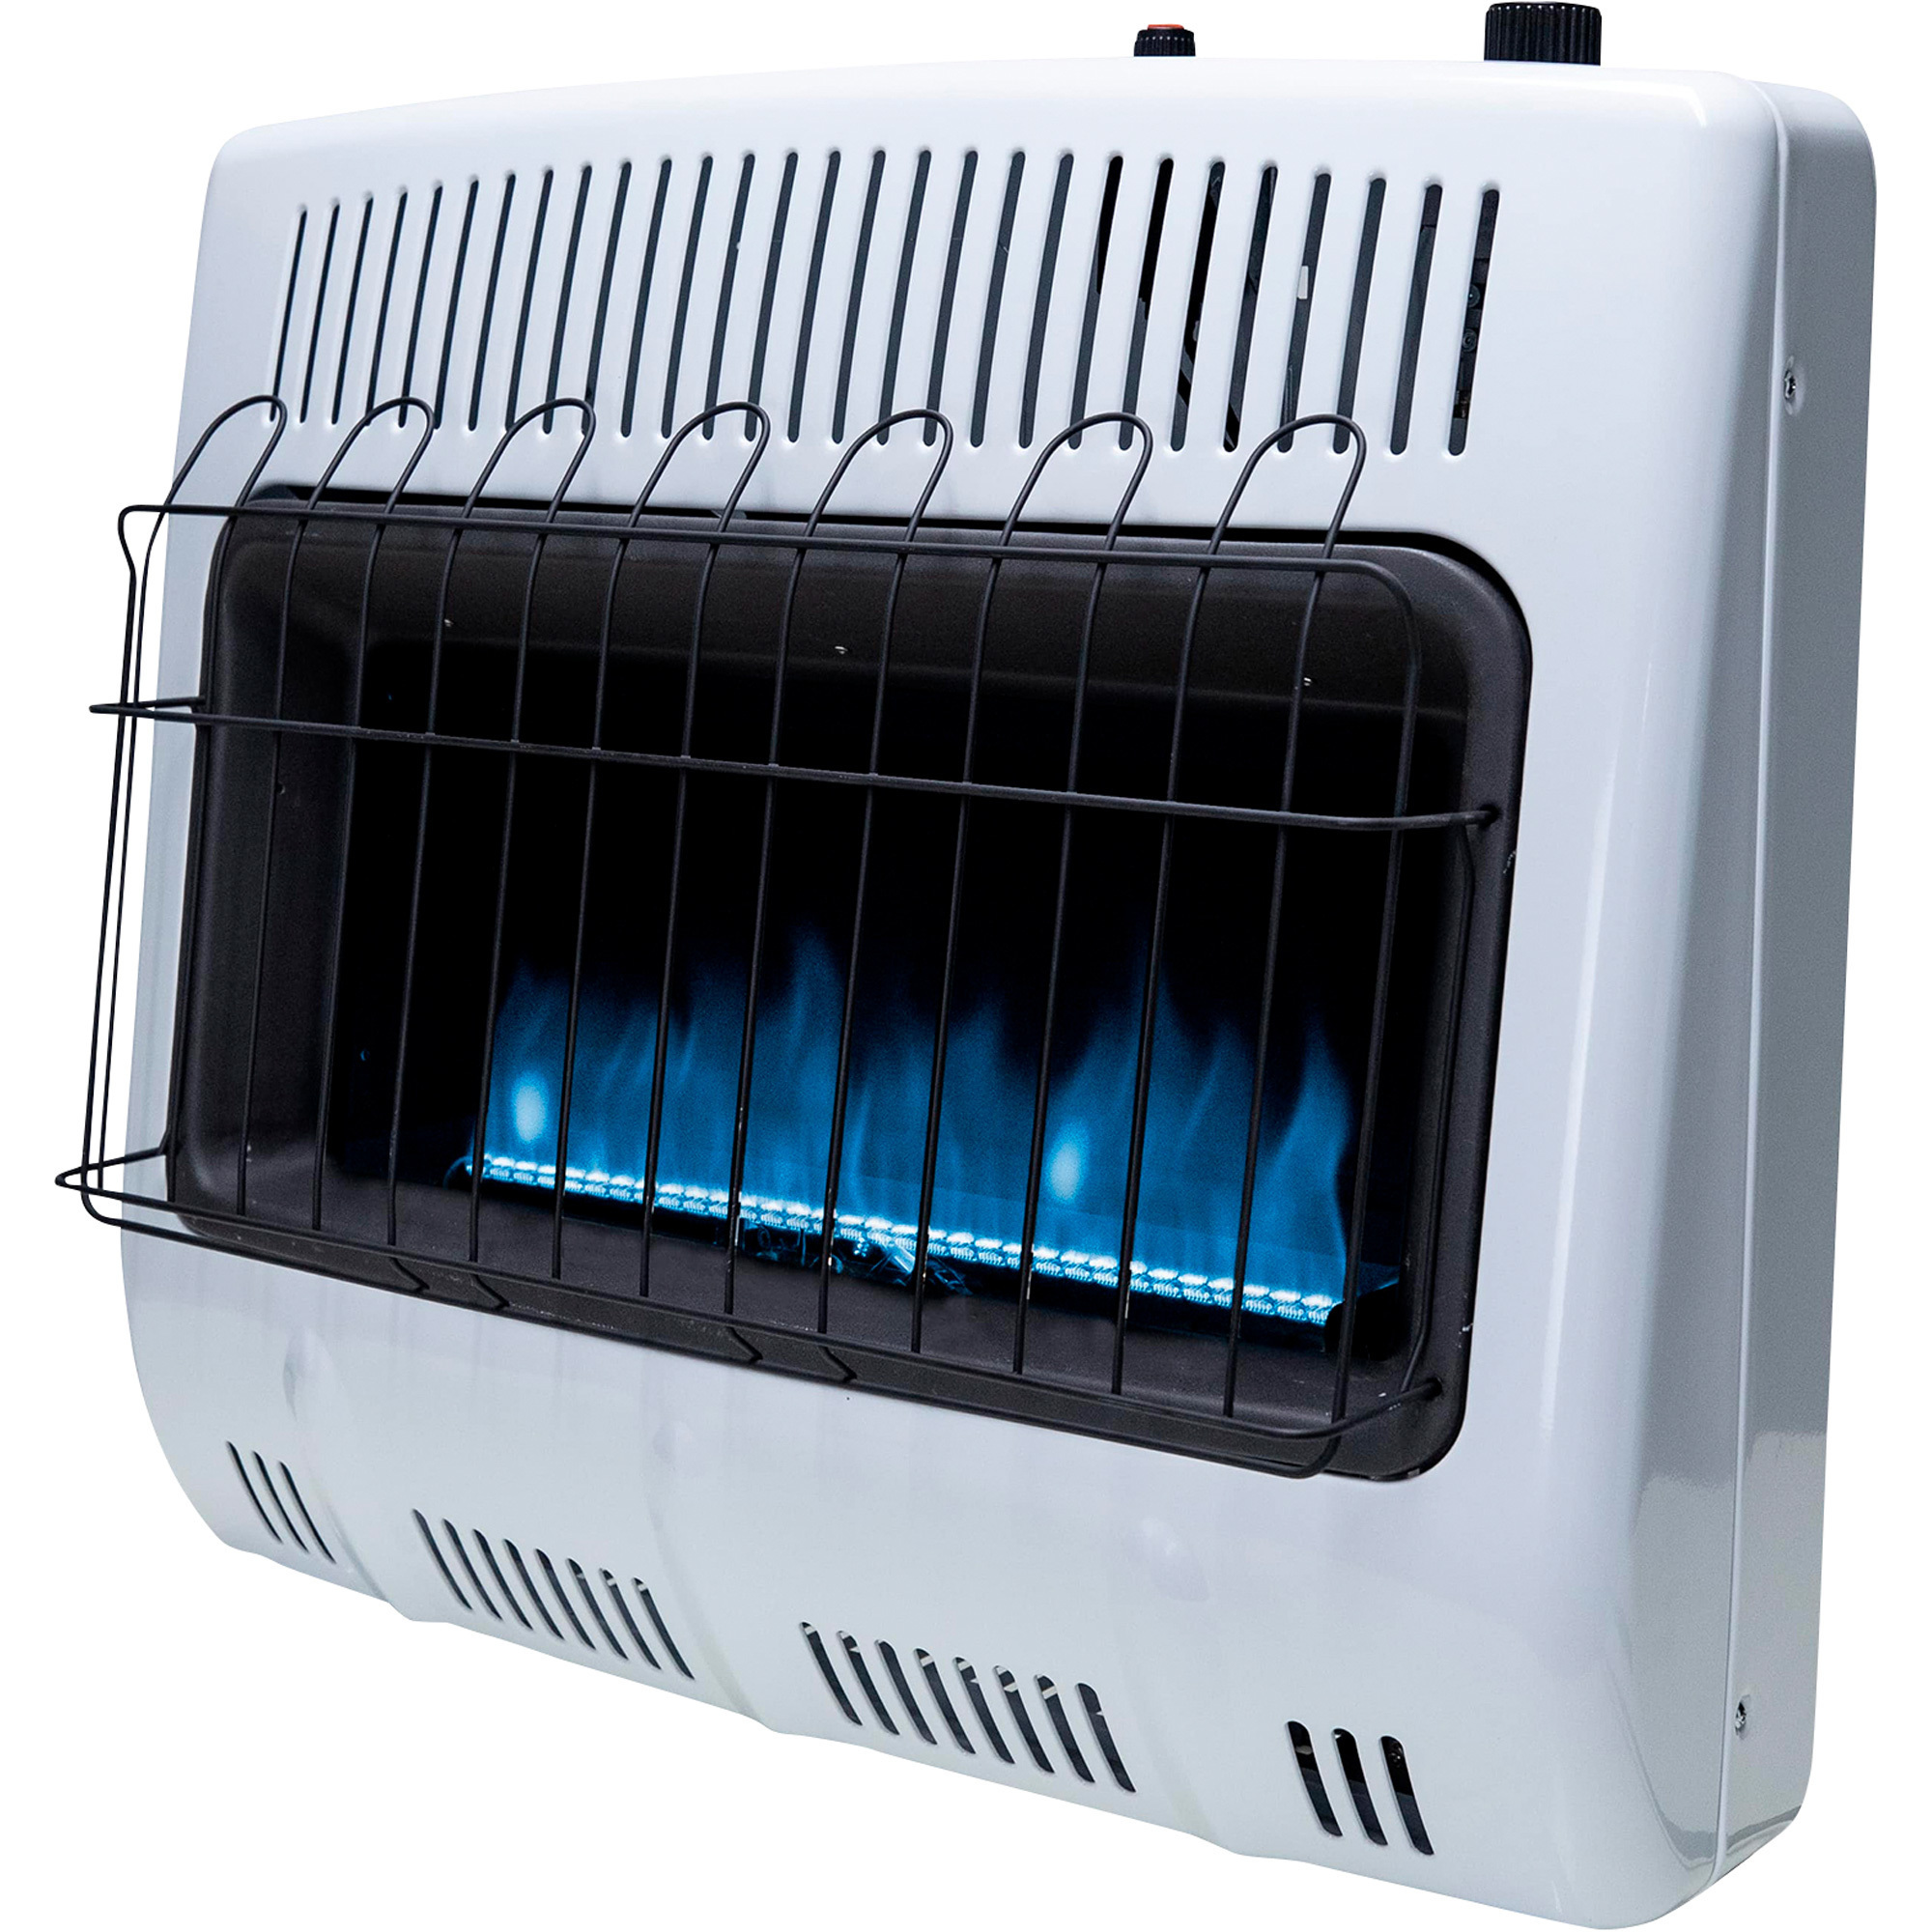 Mr. Heater 30,000 BTU Propane Vent-Free Blue Flame Wall Heater - Model MHVFB30LPT by Northern Tool